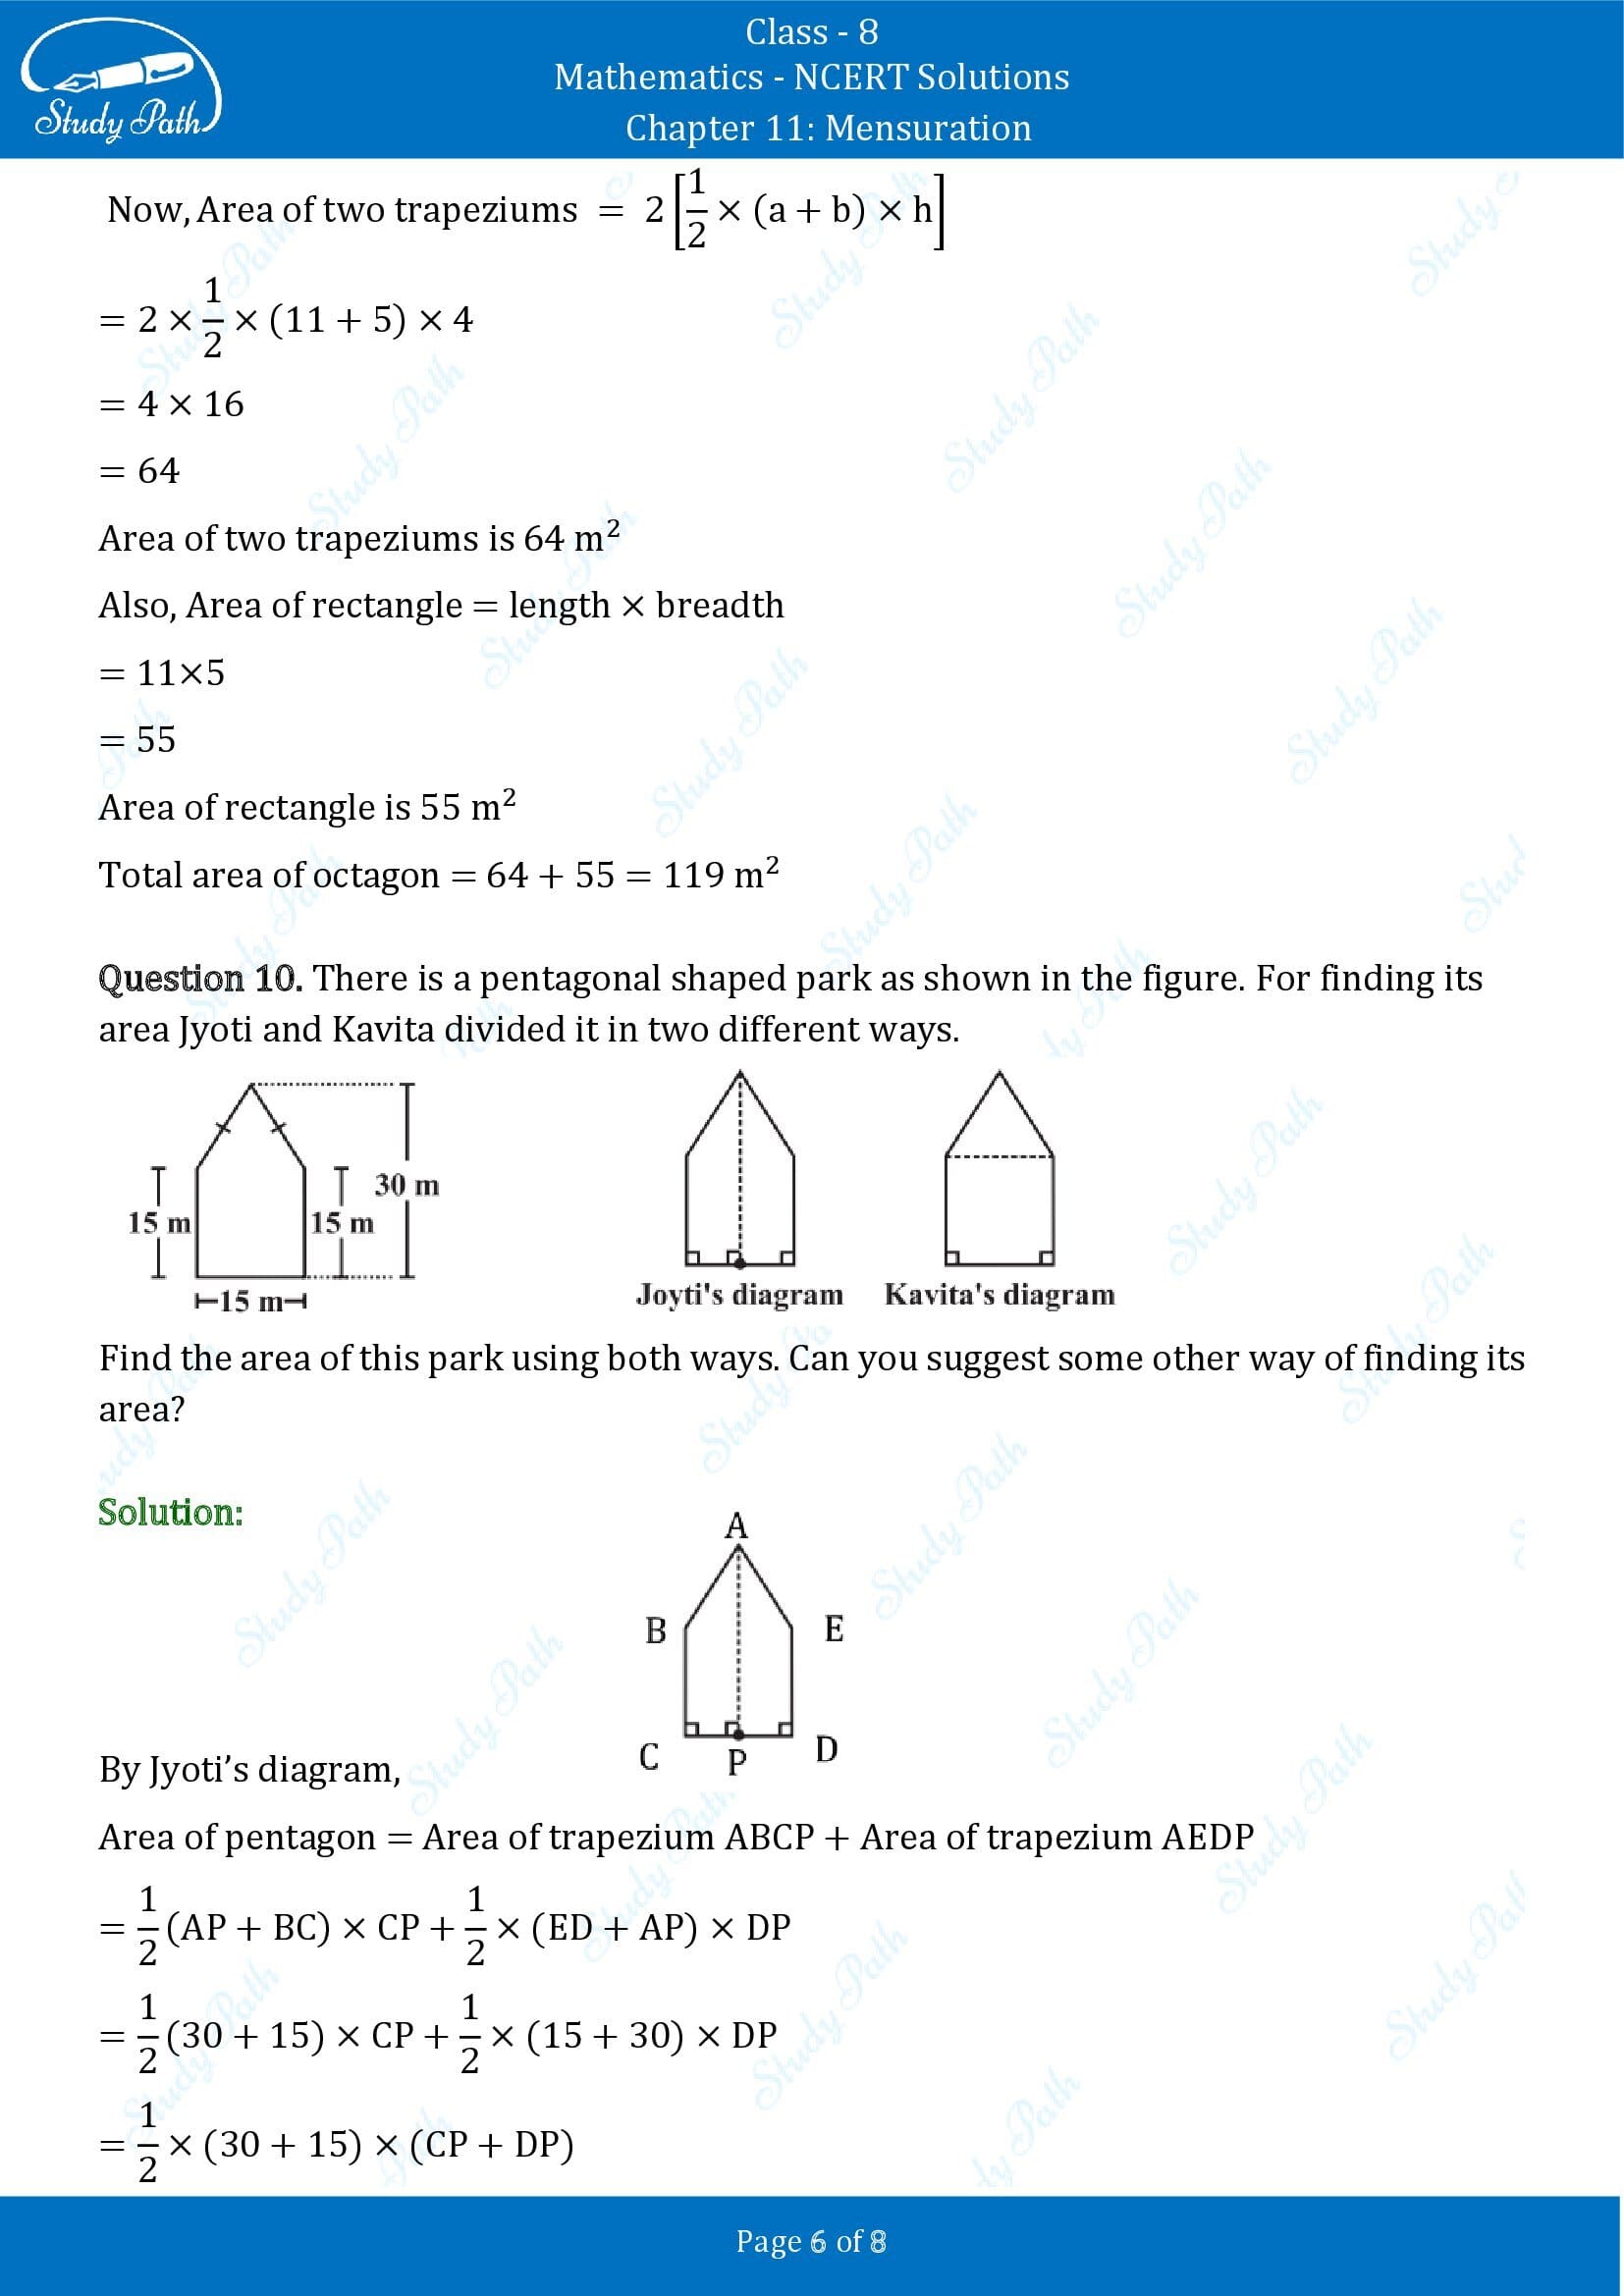 NCERT Solutions for Class 8 Maths Chapter 11 Mensuration Exercise 11.2 00006